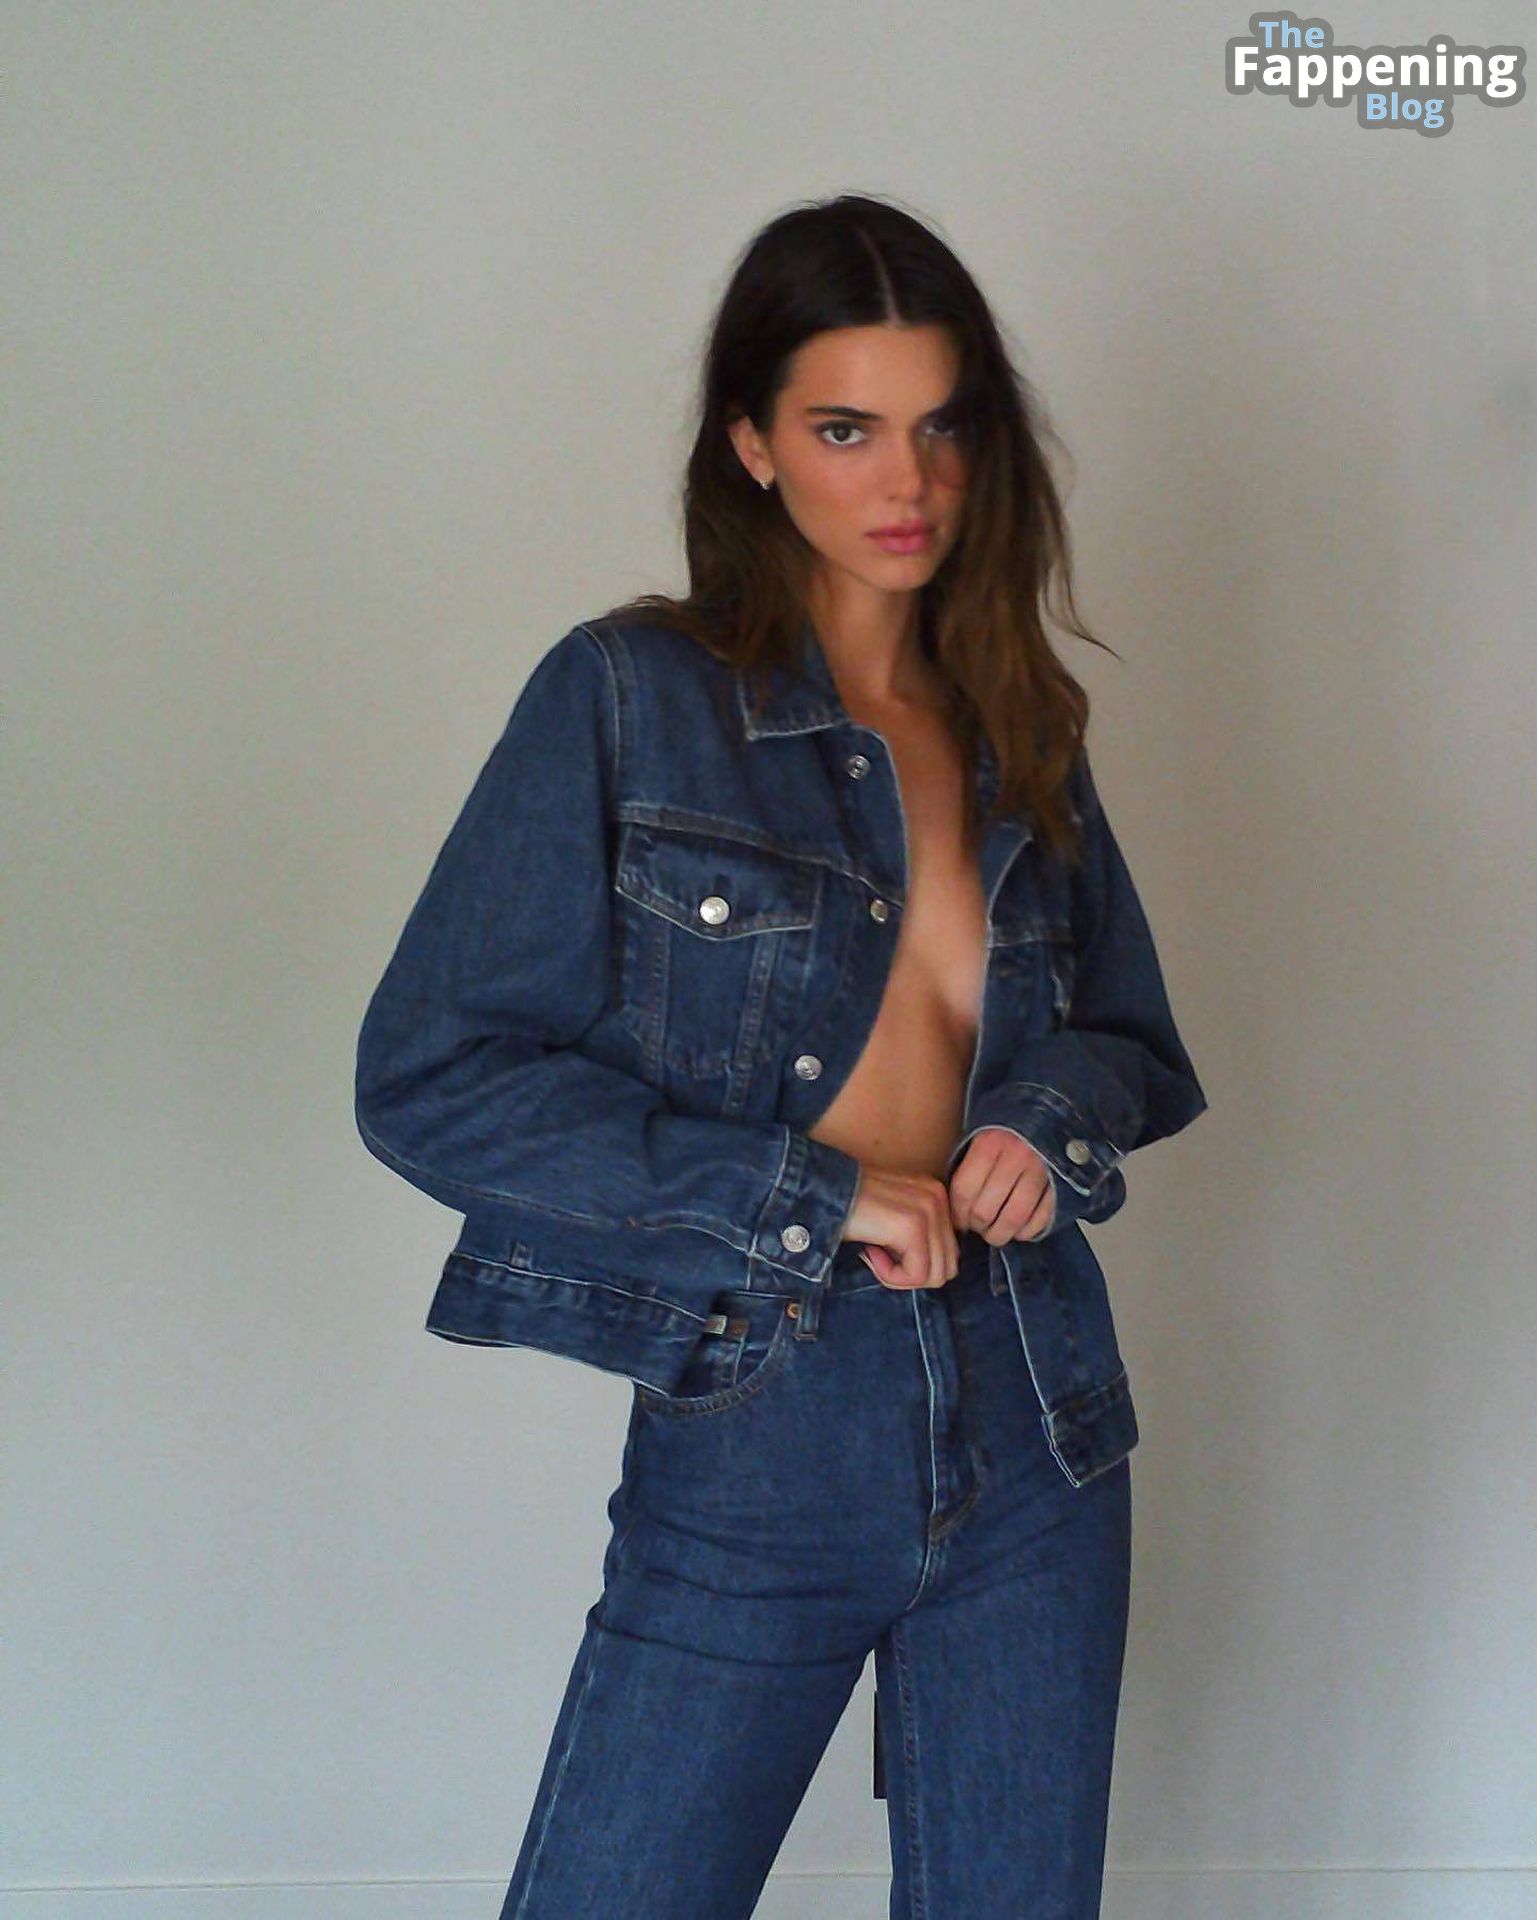 Kendall Jenner Poses in a New Promo Shoot (15 Photos)